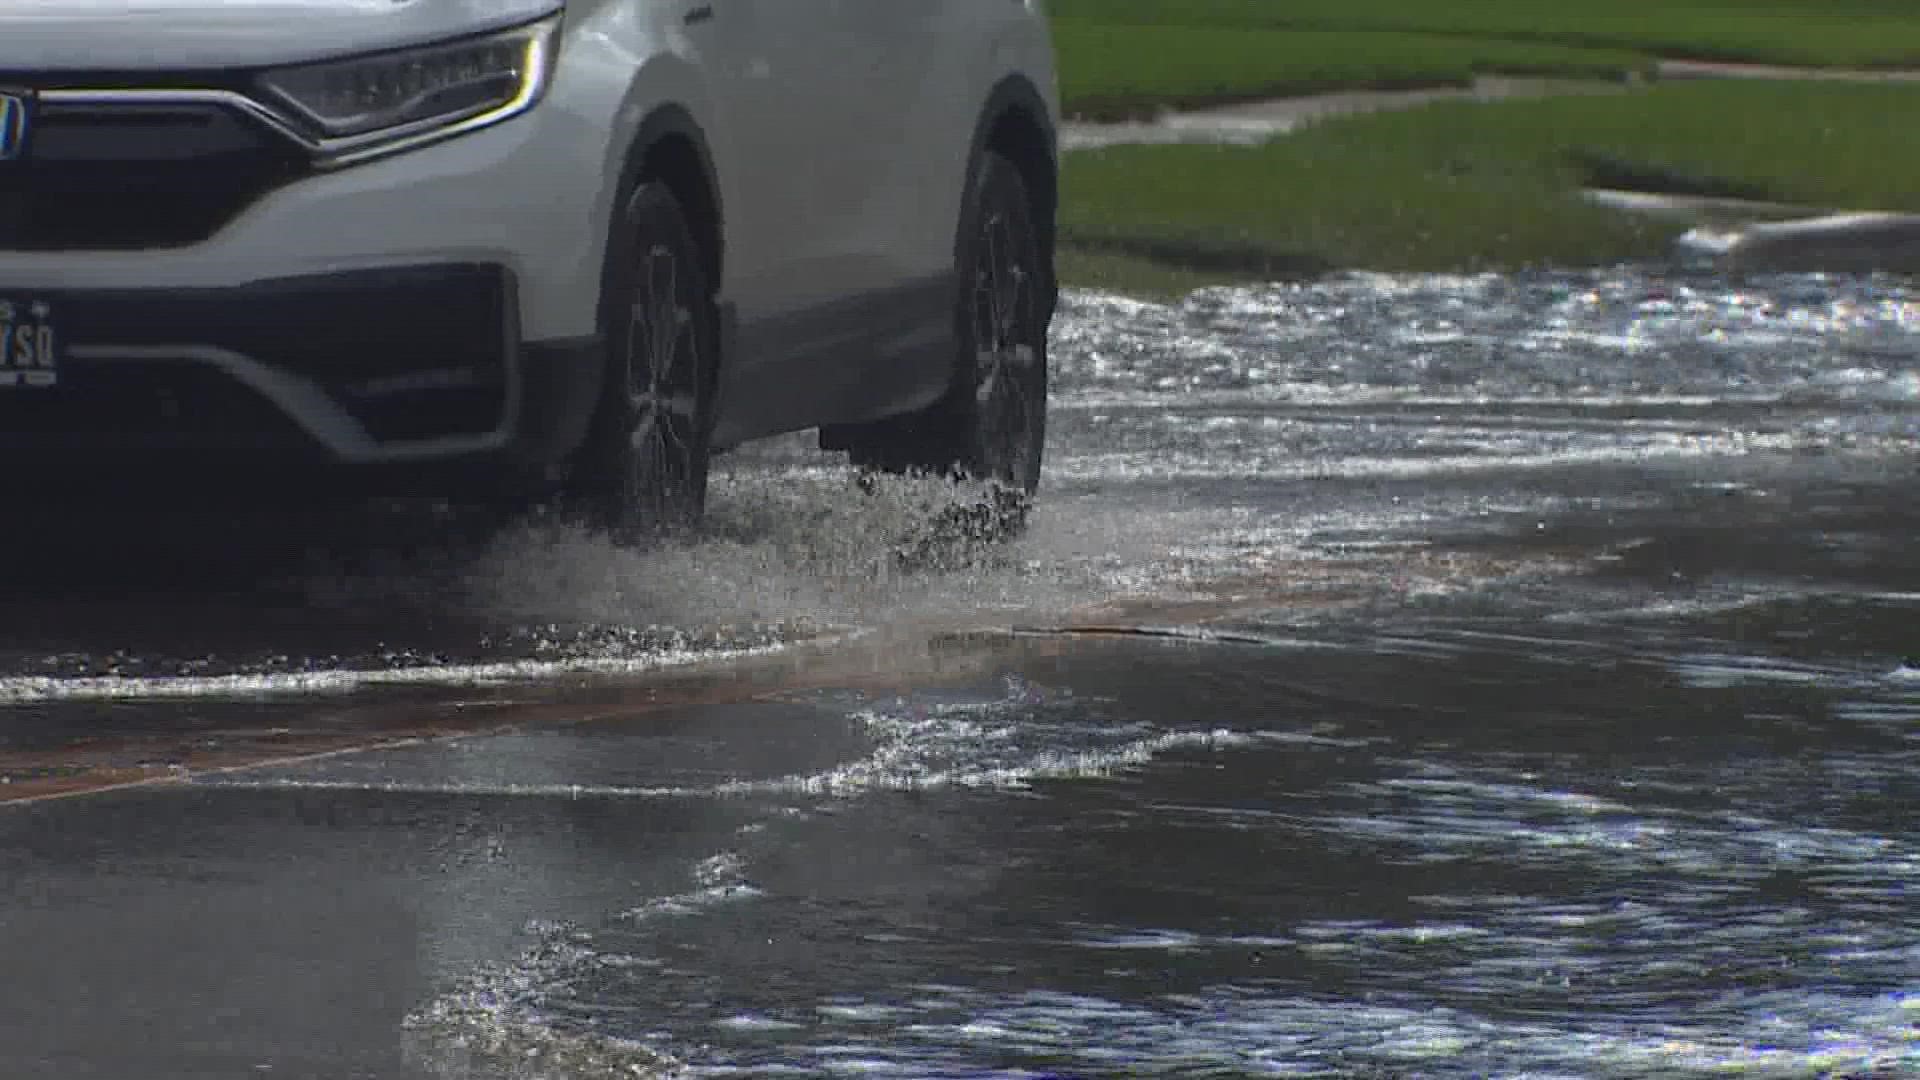 KHOU 11 Investigates analyzed more than 4,000 311 calls this year to find the hot spots for high-water issues.